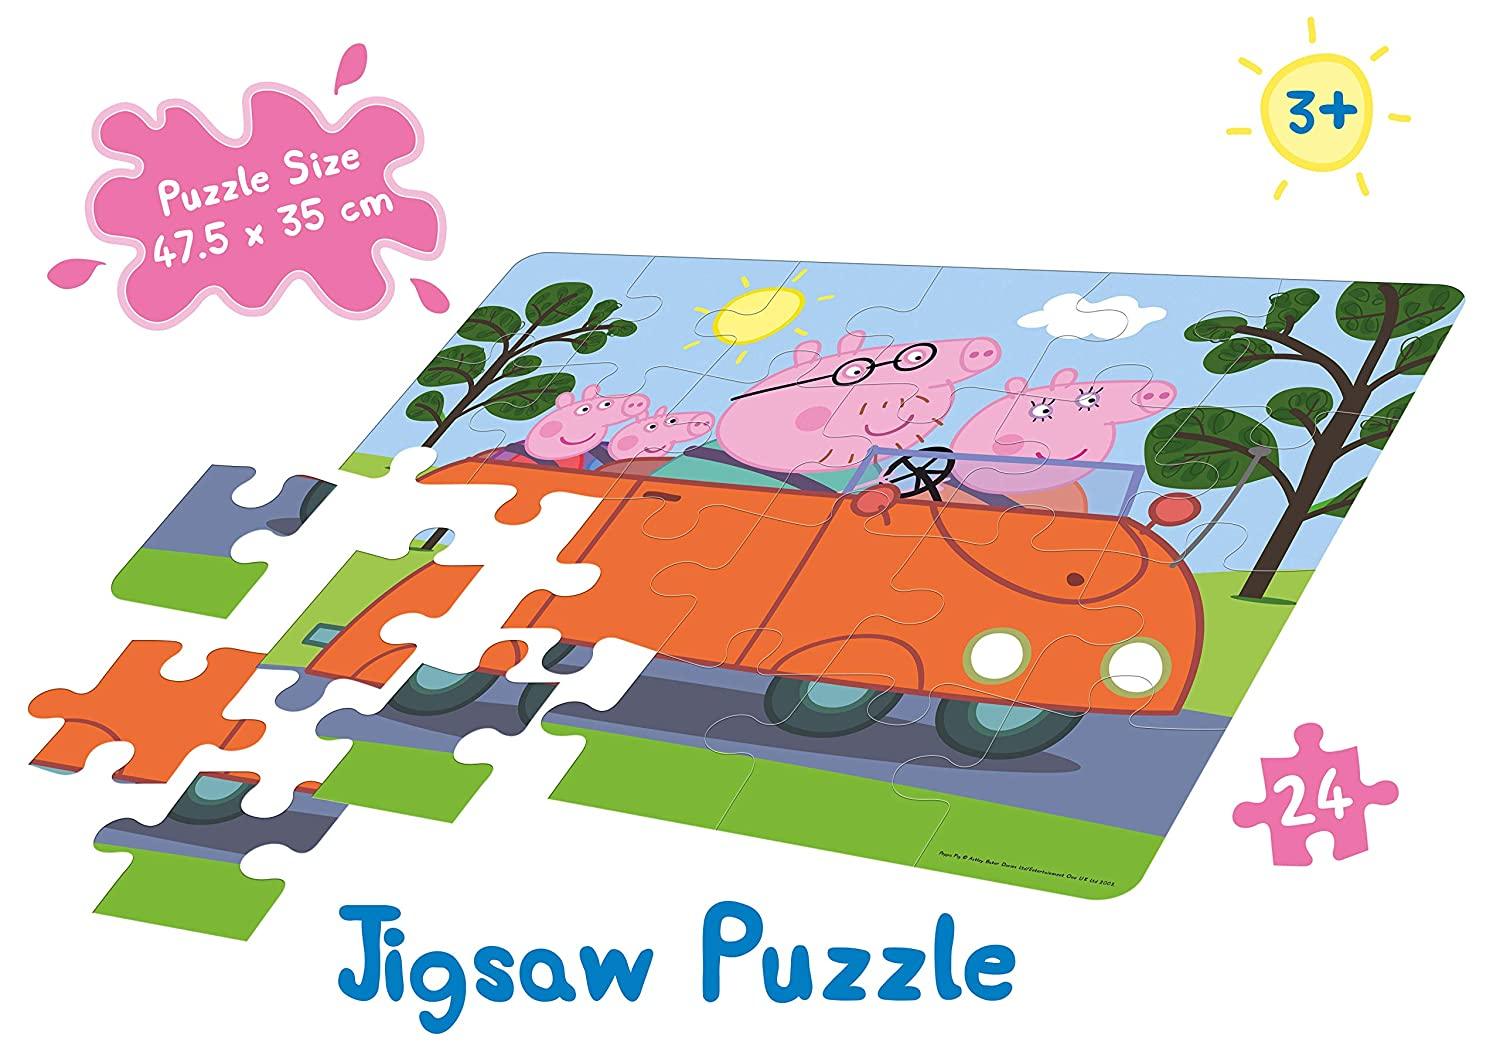 Frank Peppa Pig - Puzzle For 3 Year Old Kids And Above